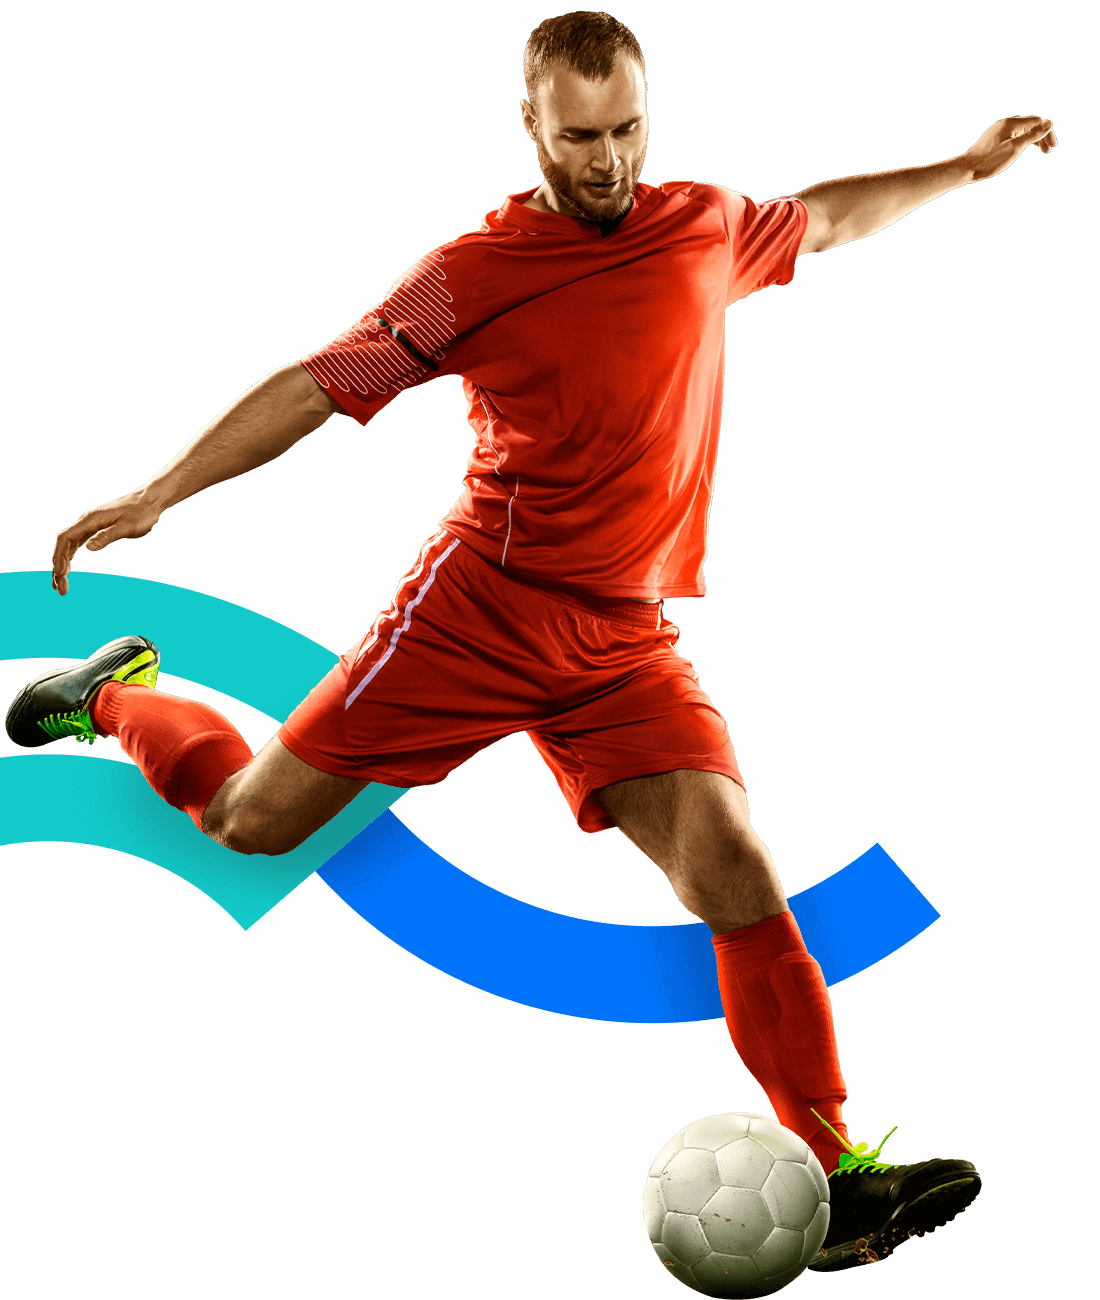 In the picture, a male football player kicks a ball. He extends his arms and legs. He is wearing a red uniform.